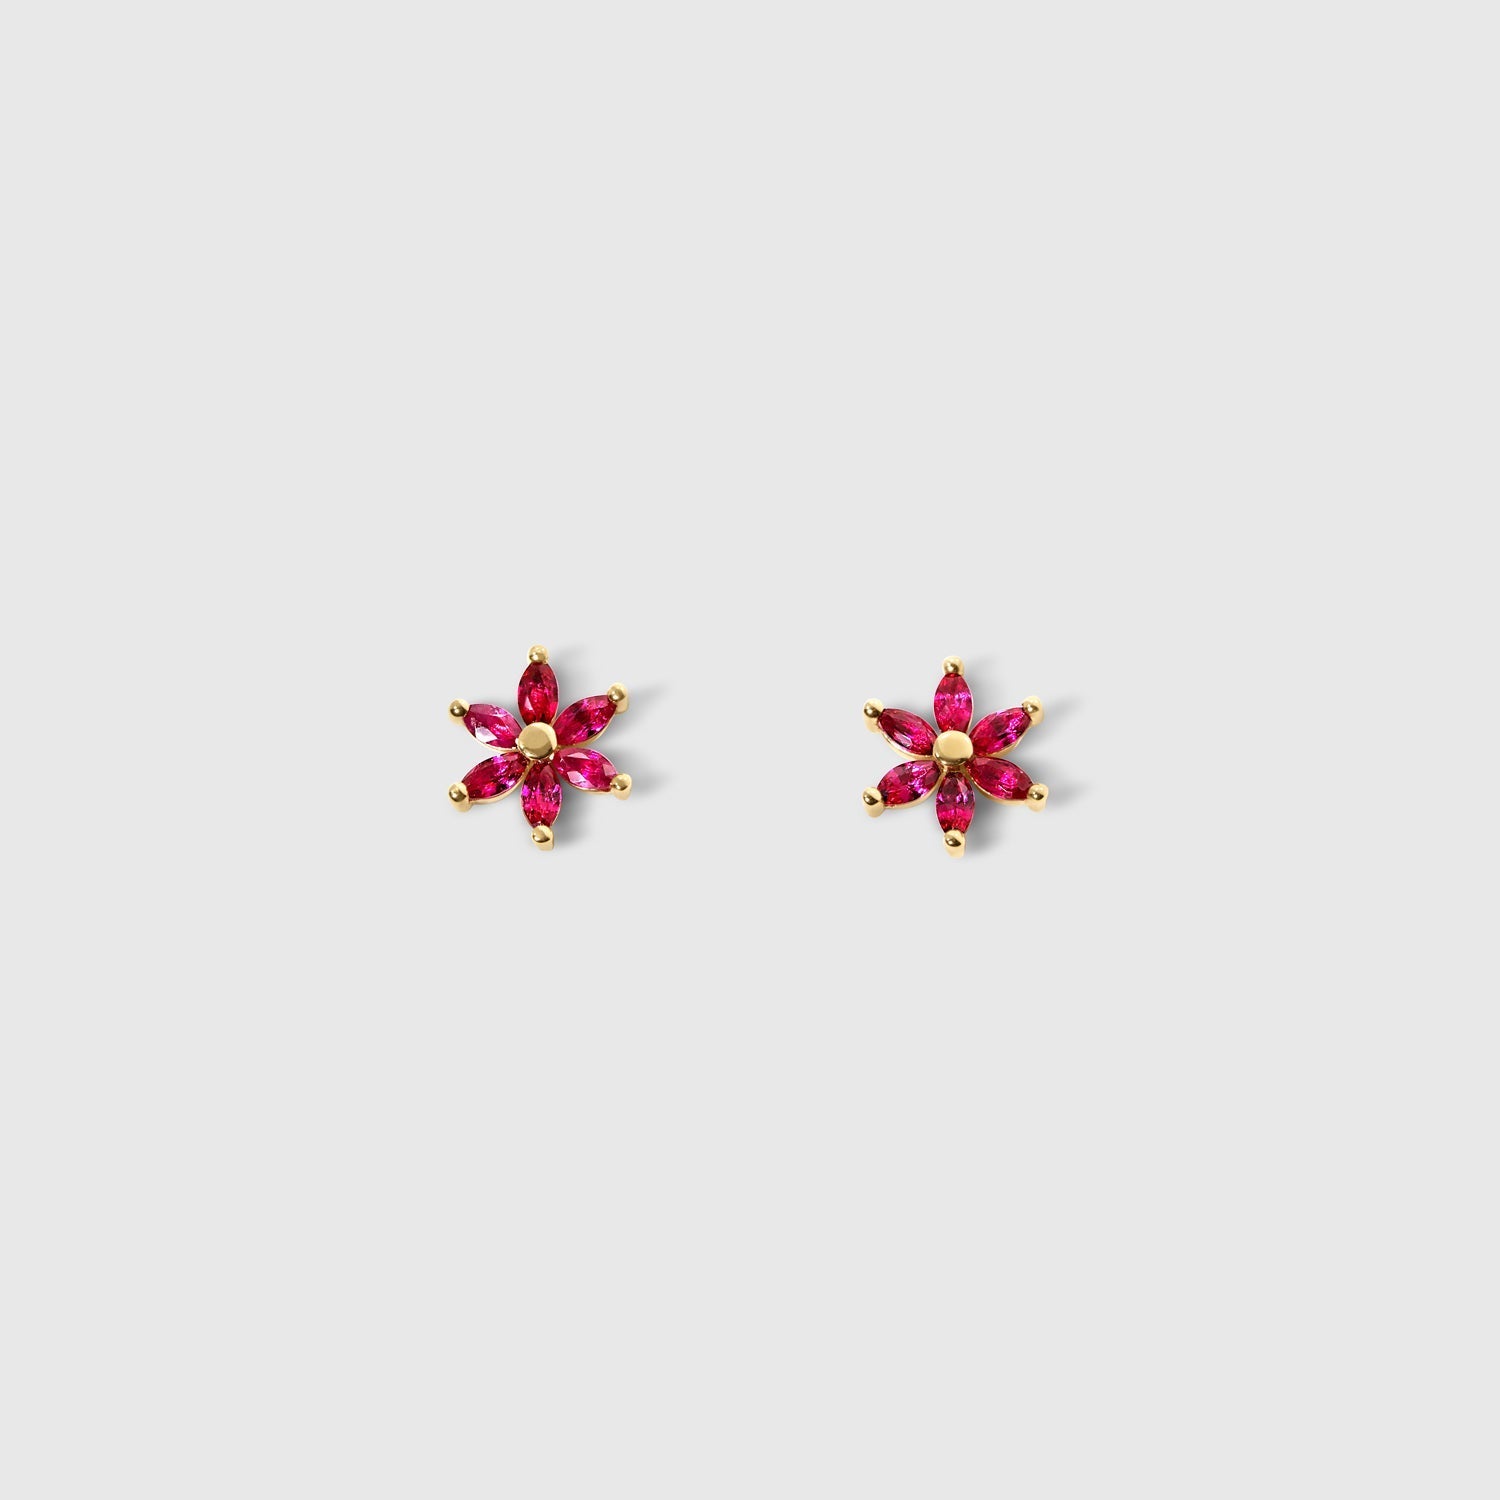 Gladis - Ruby Flower Stud Earrings – La Fleur Rouge Collection of Rubies & Solid Gold - Aurora Laffite Jewelry